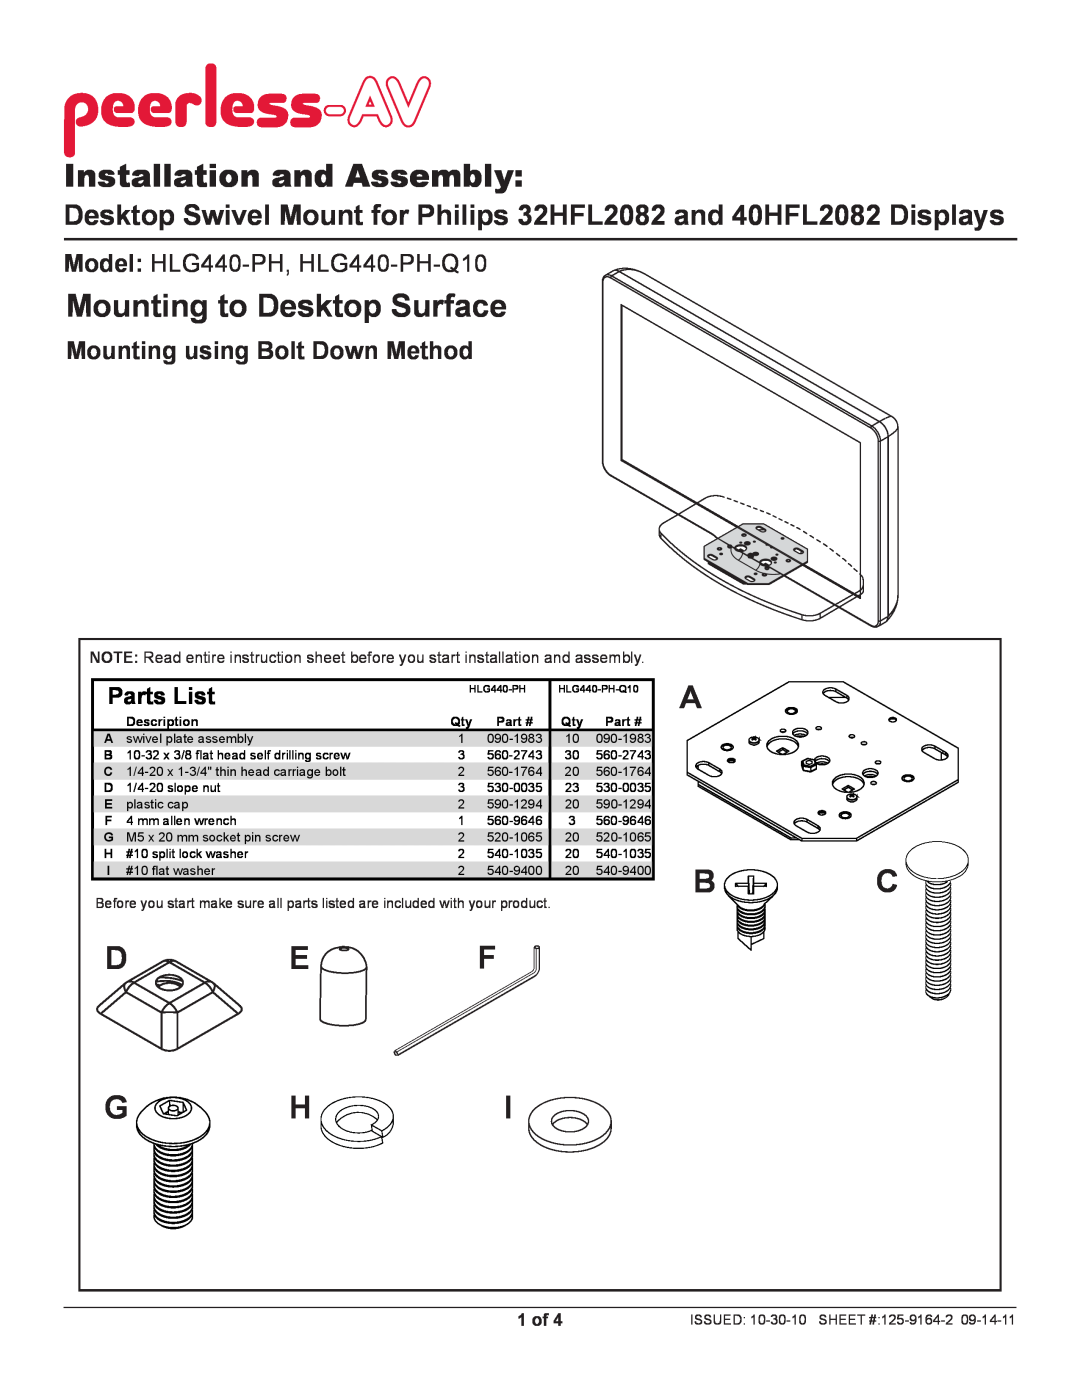 Peerless Industries HLG440-PH instruction sheet Installation and Assembly, Mounting to Desktop Surface, D E F, A B C, 1 of 